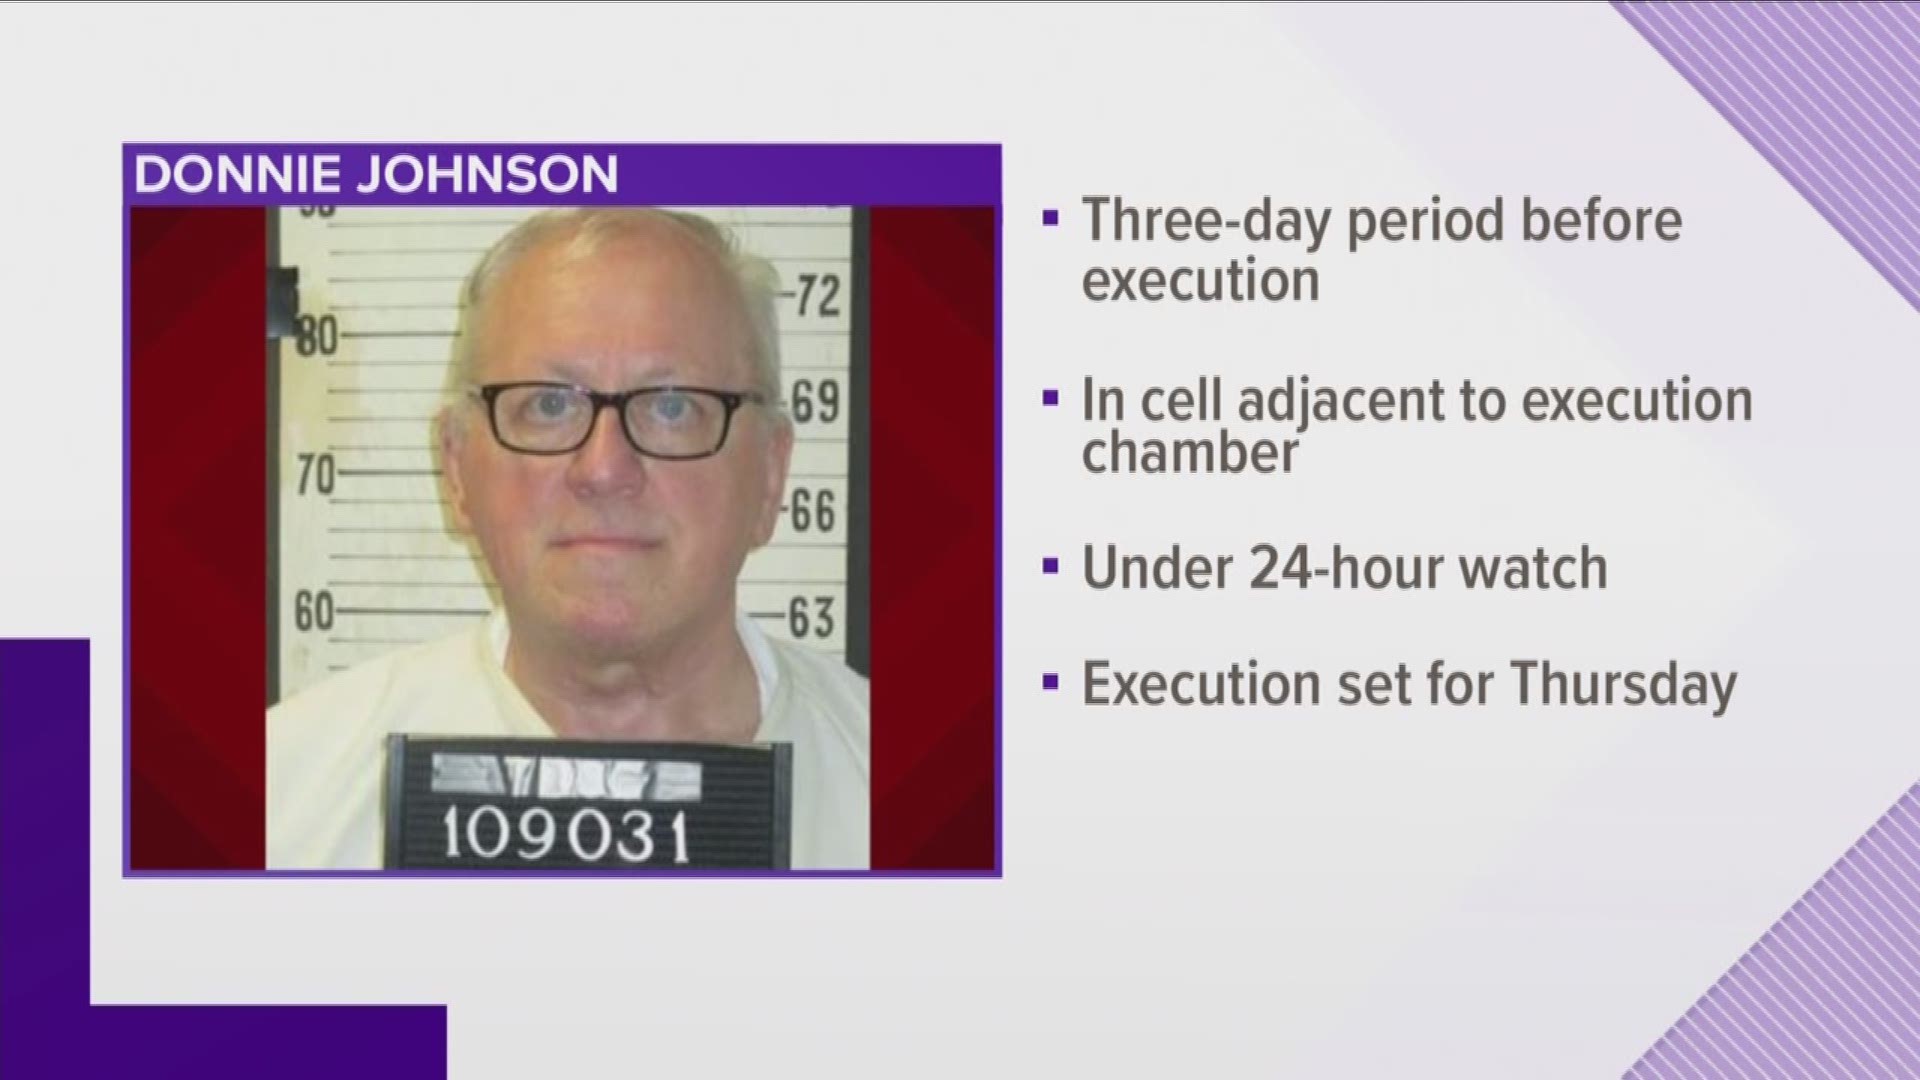 Donnie Johnson suffocated his wife in 1984 in Memphis and has been on death row for more than three decades. He has asked Tennessee Gov. Bill Lee to commute his sentence to life without parole because he is now a changed man.